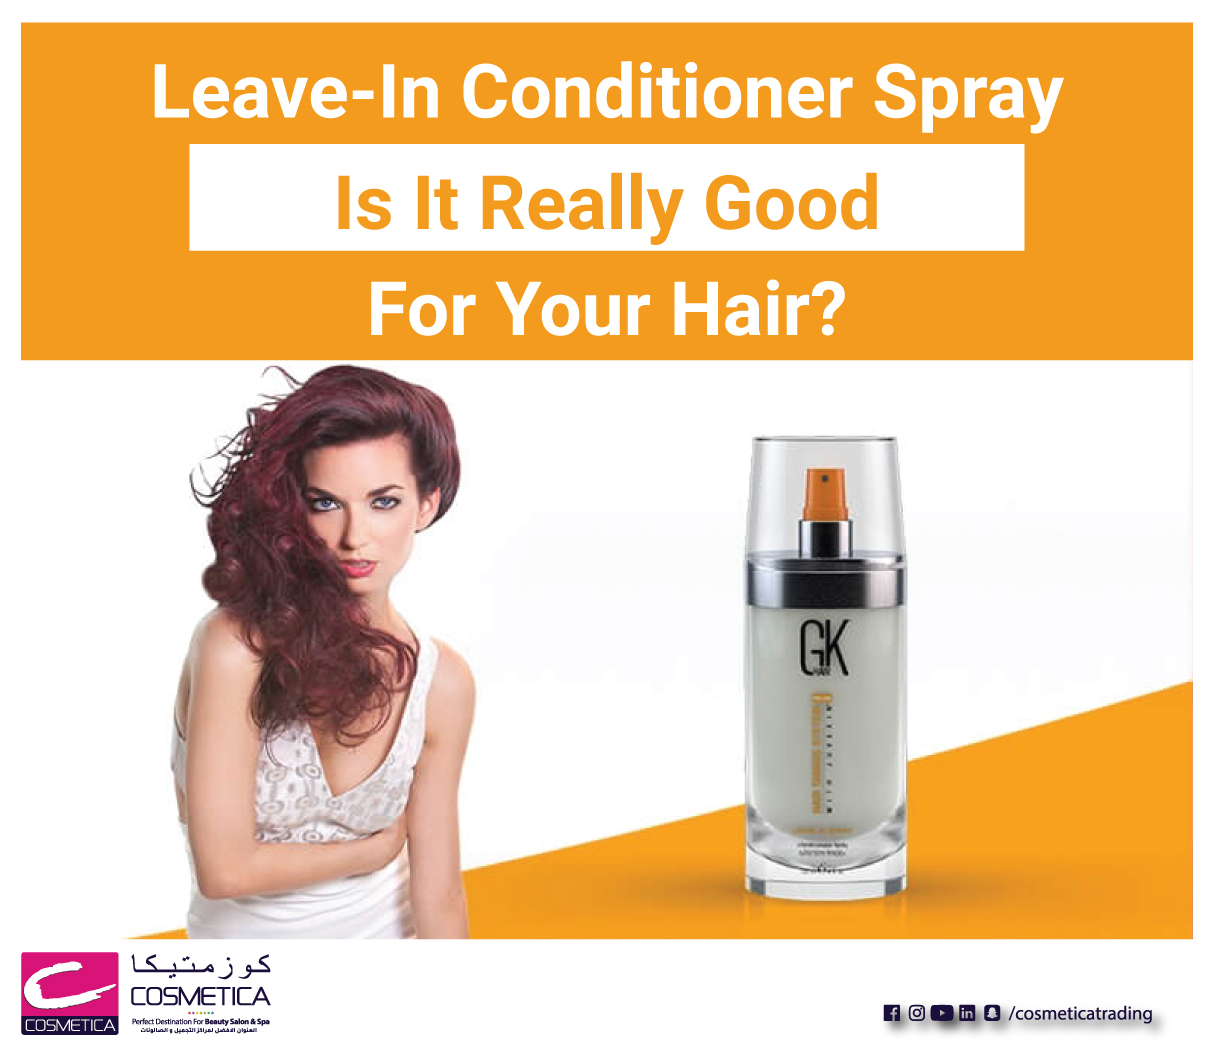 GK Hair Leave-In Conditioner Spray- Is It Really Good For Your Hair?